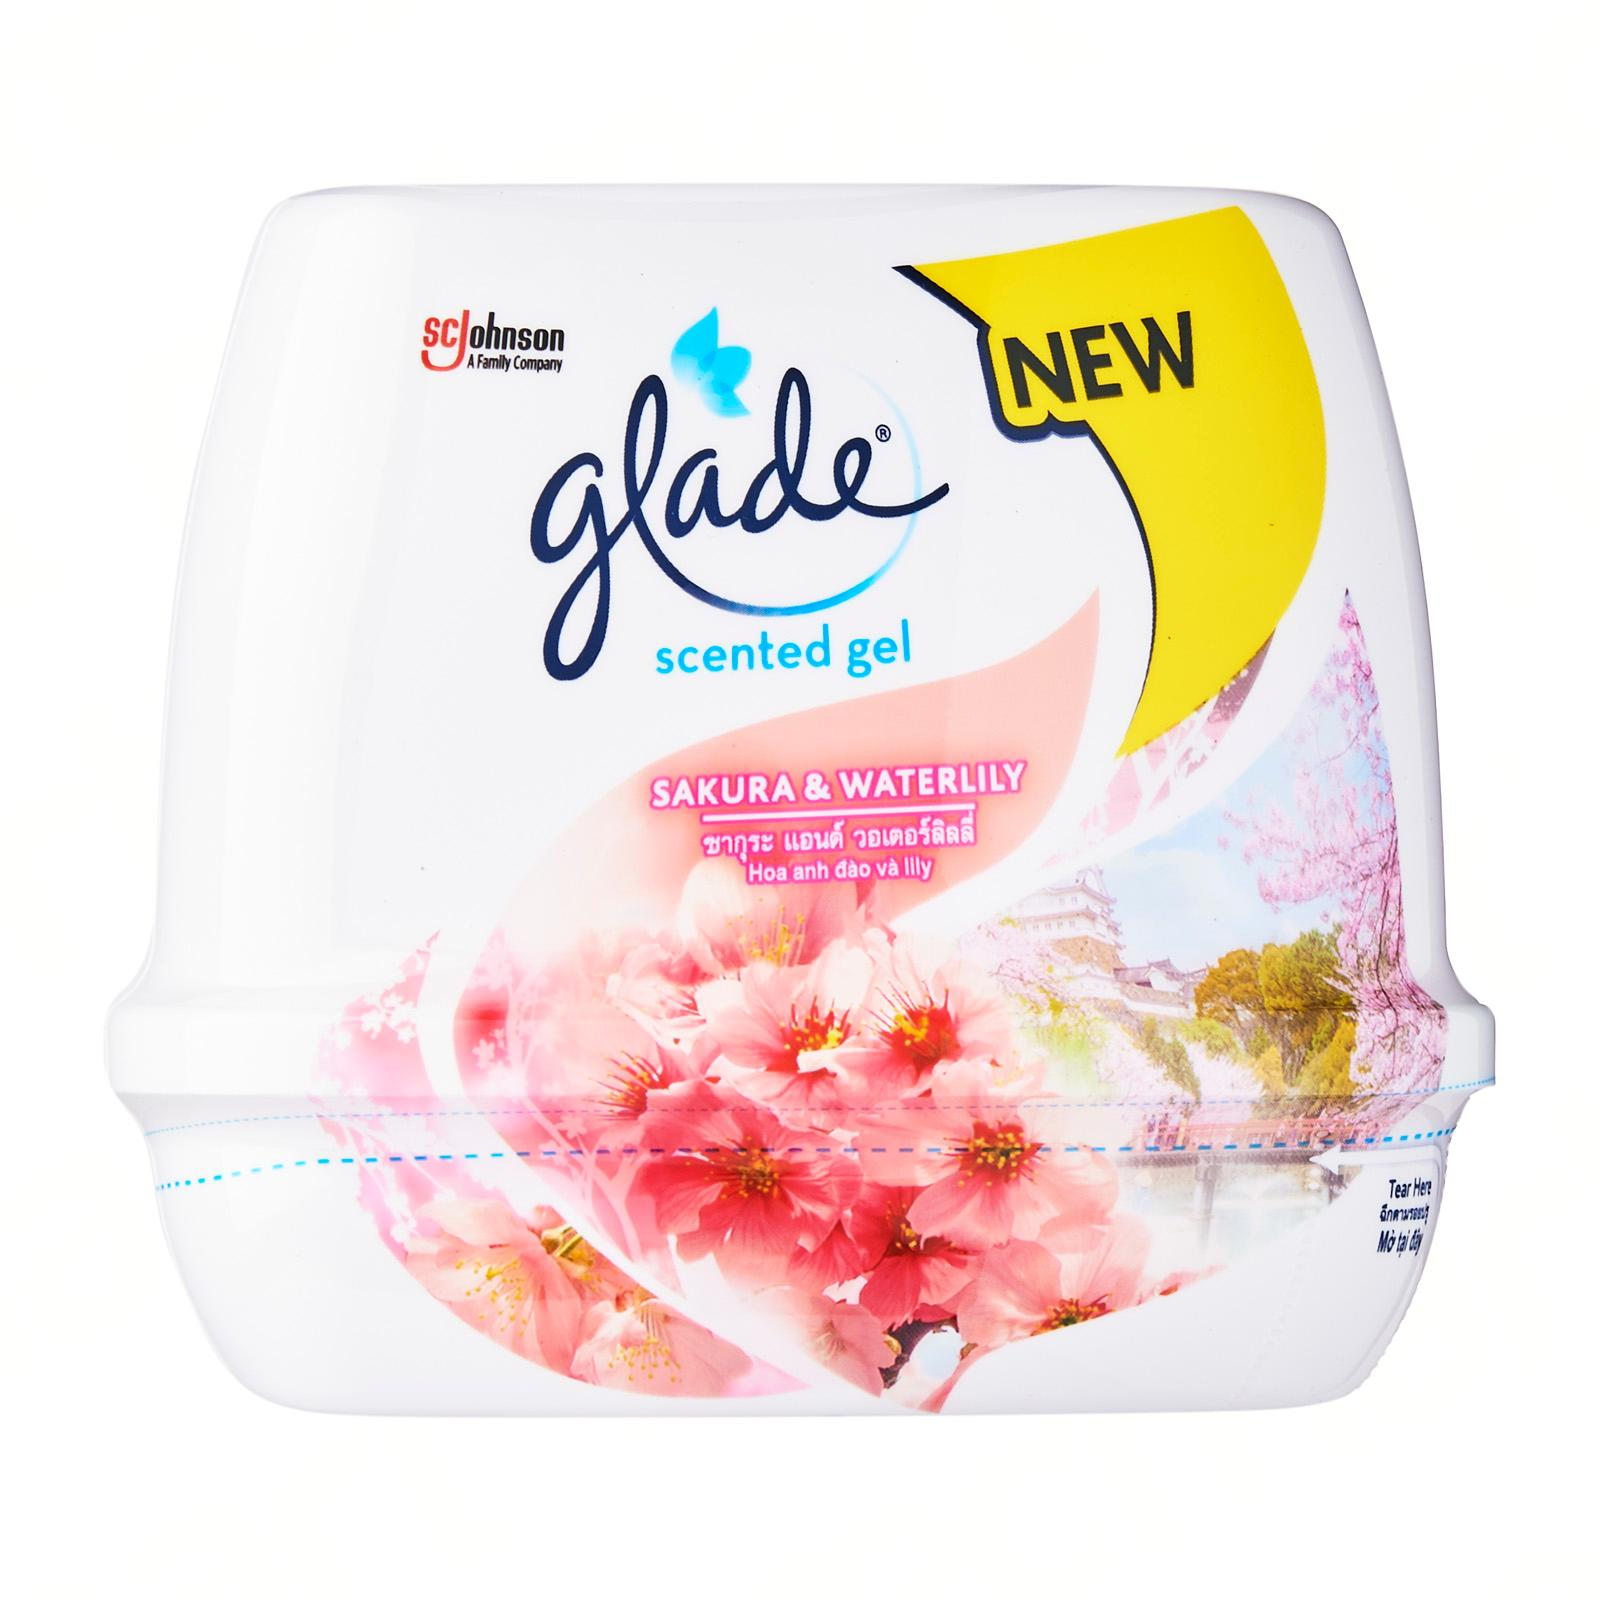 Glade Scented Gel Sakura 180g is best Buy the Best Air Fresheners Online in SG this year, 10 Best Air Fresheners for a Home That Always Smells refreshing, Which room freshener is best?,How can I make my house smell good all the time?,What is the most powerful air freshener?,How do I keep my bedroom smelling fresh?, How can I make my bedroom smell good?,What is the best indoor air freshener?,Which smell is best for room freshener?,Which is the best air freshener?,